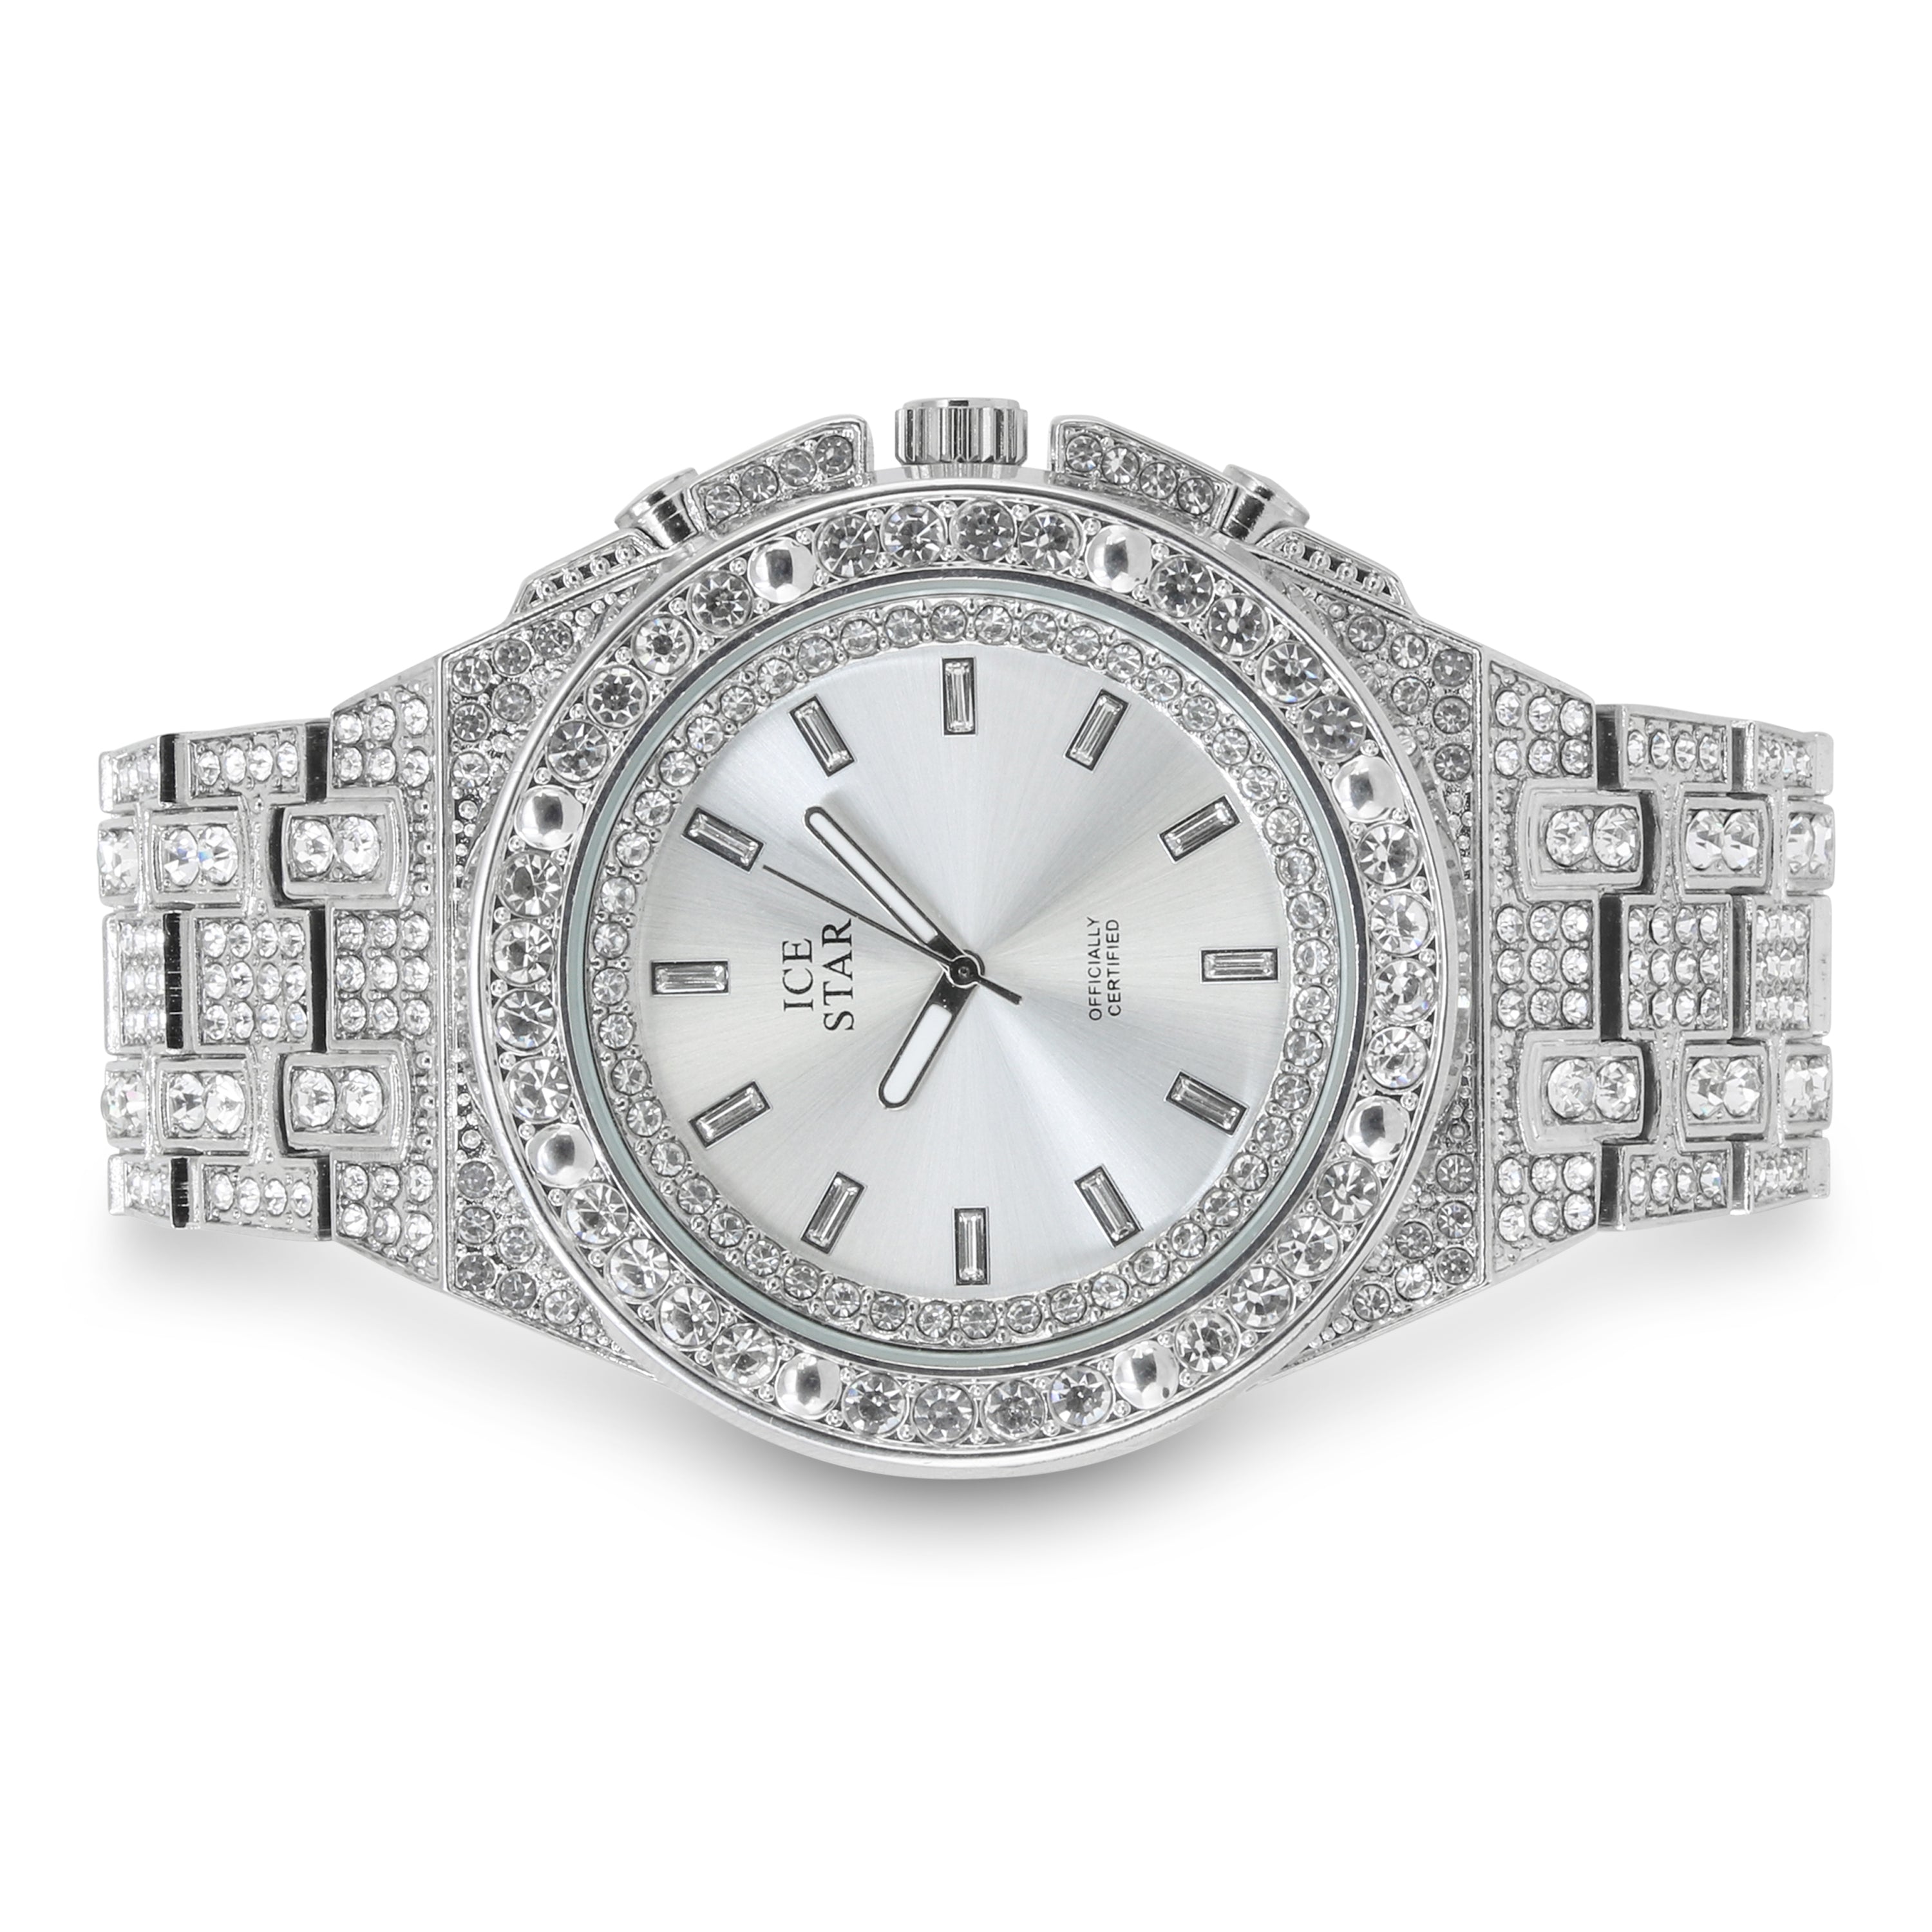 Men's Round Iced Out Watch 45mm Silver- Baguette Dial